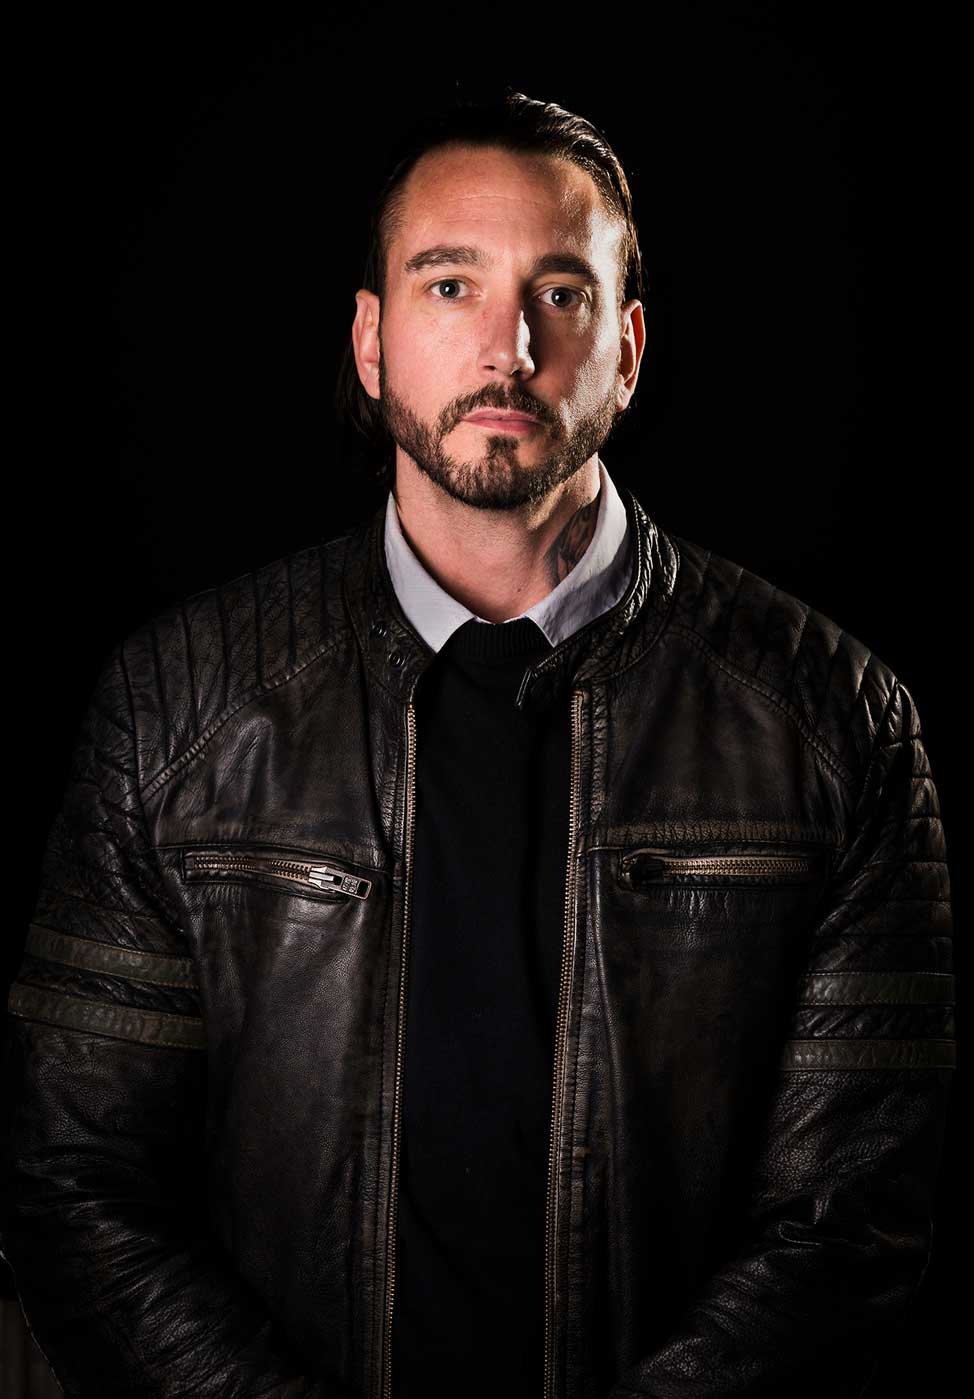 man looking at the camera for a corporate headshot with a dark background.